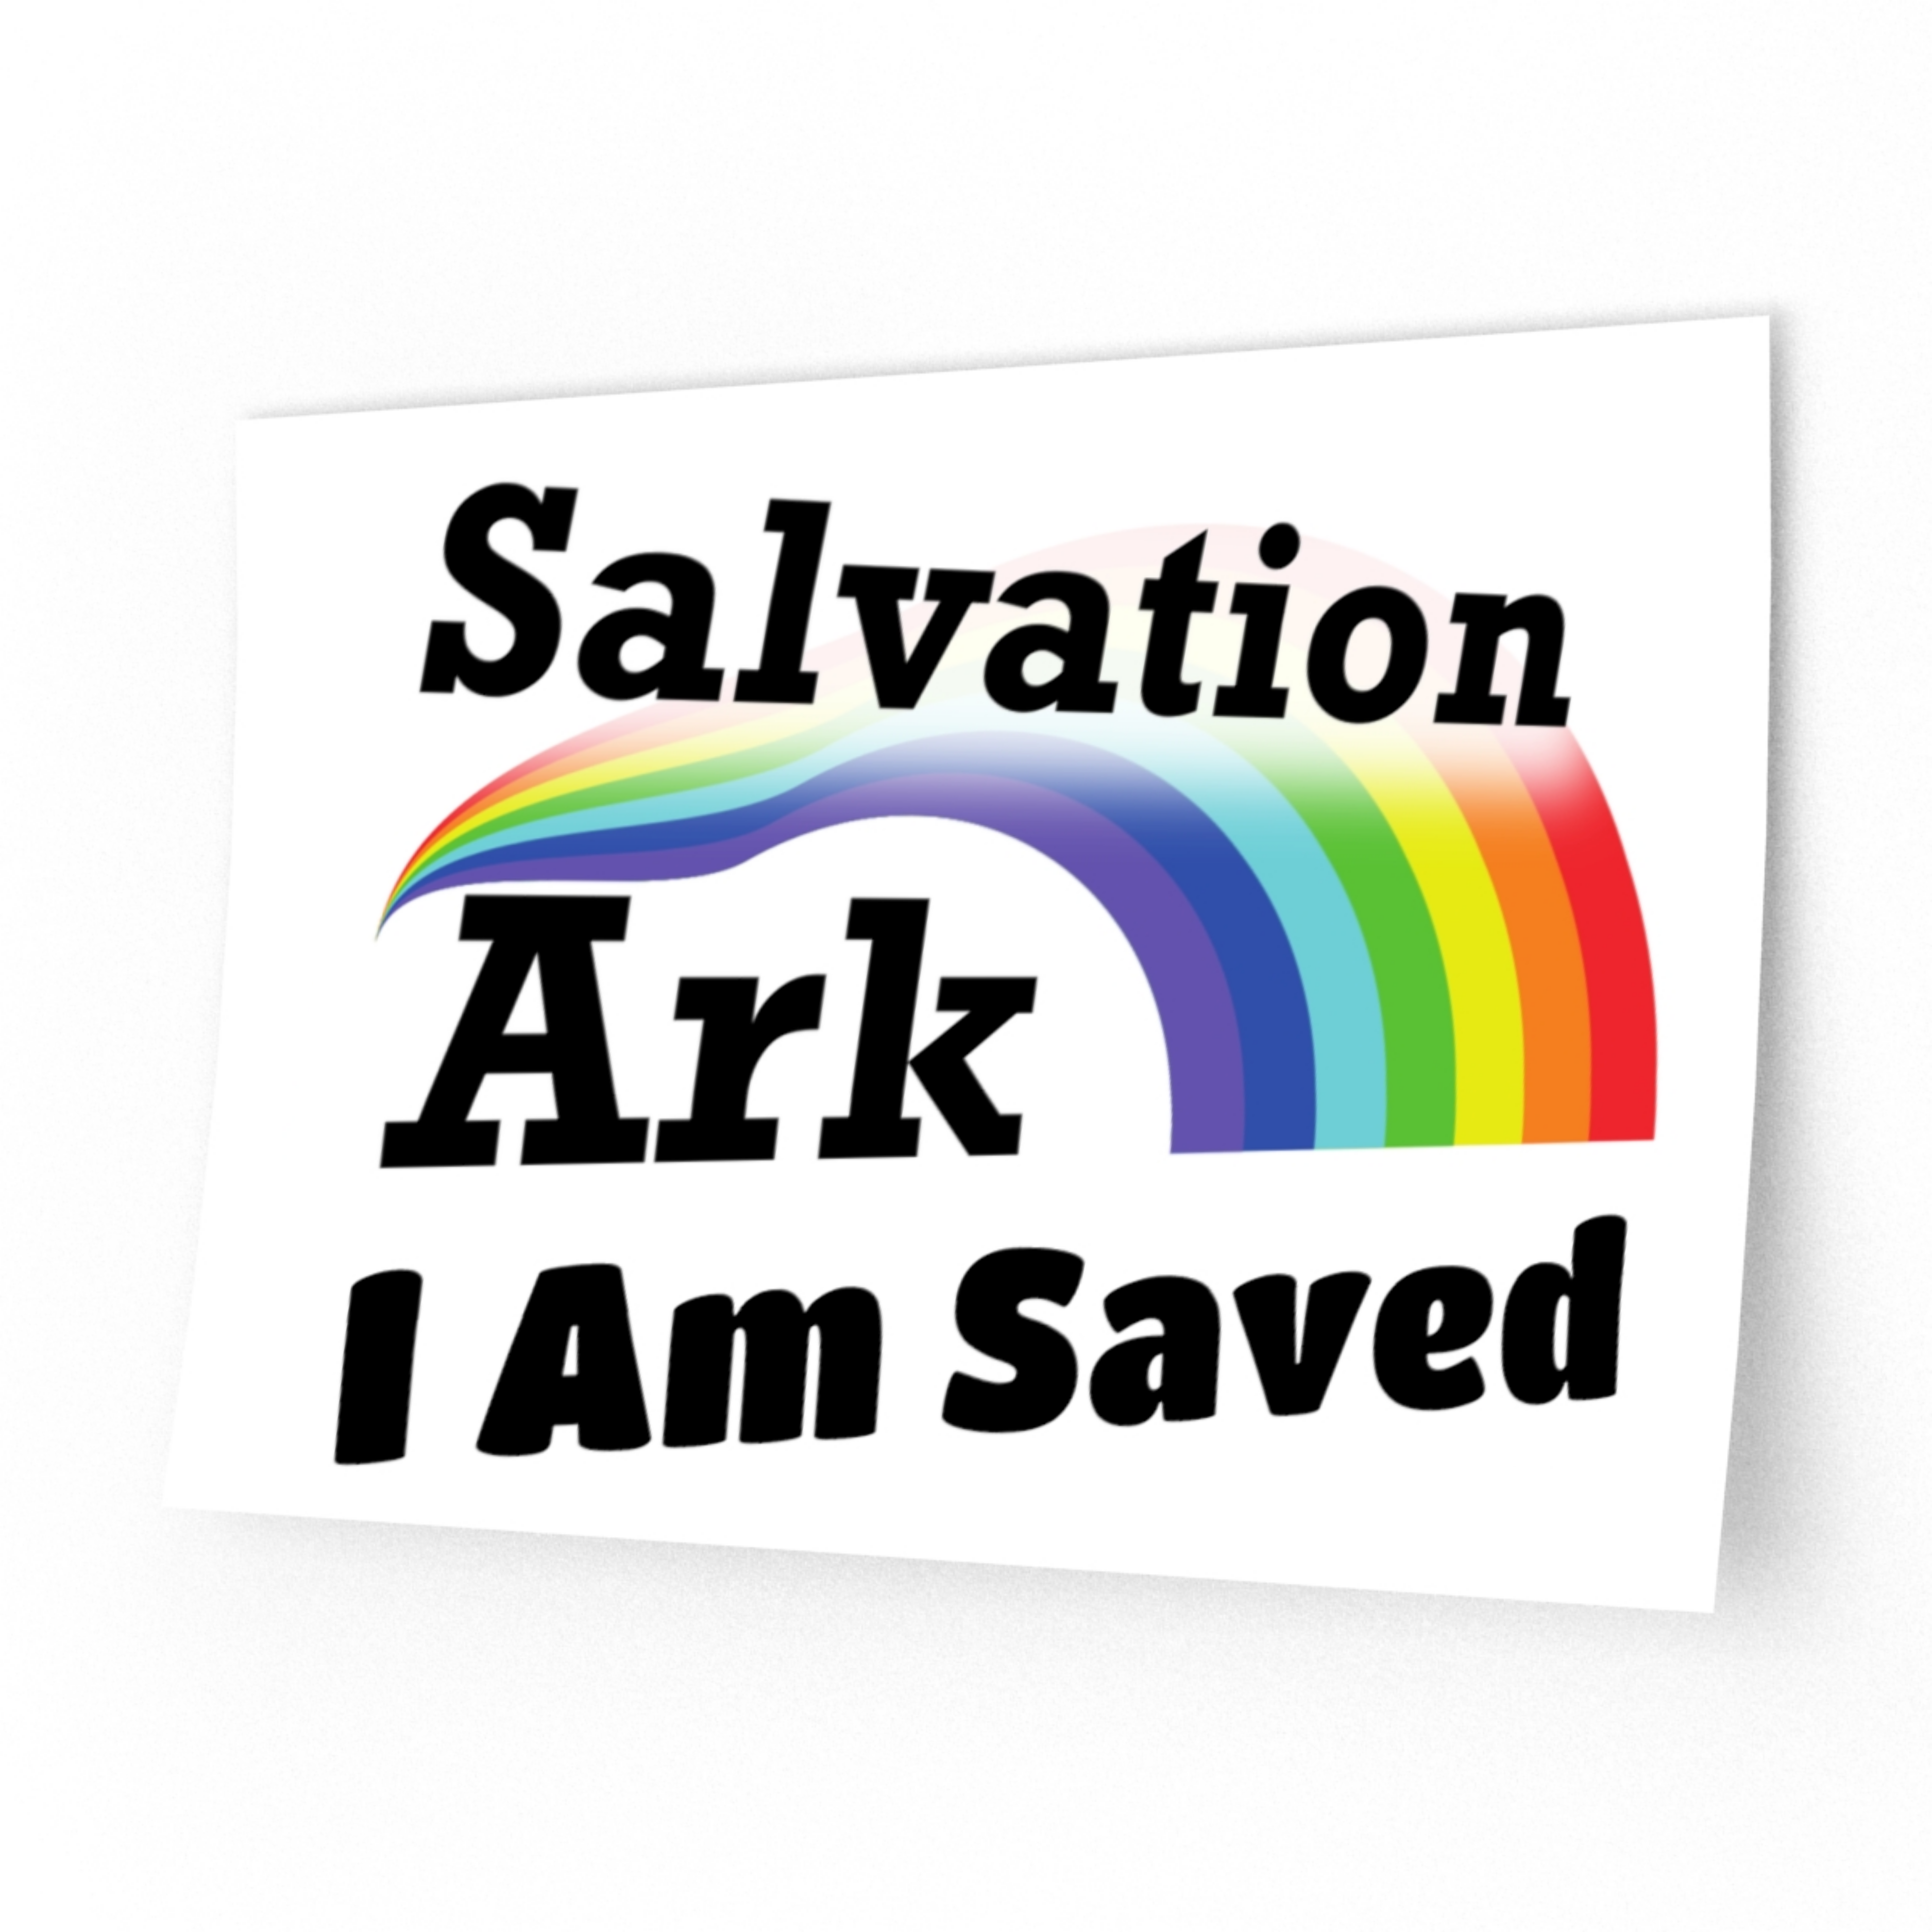 wall decal with salvation ark i am saved